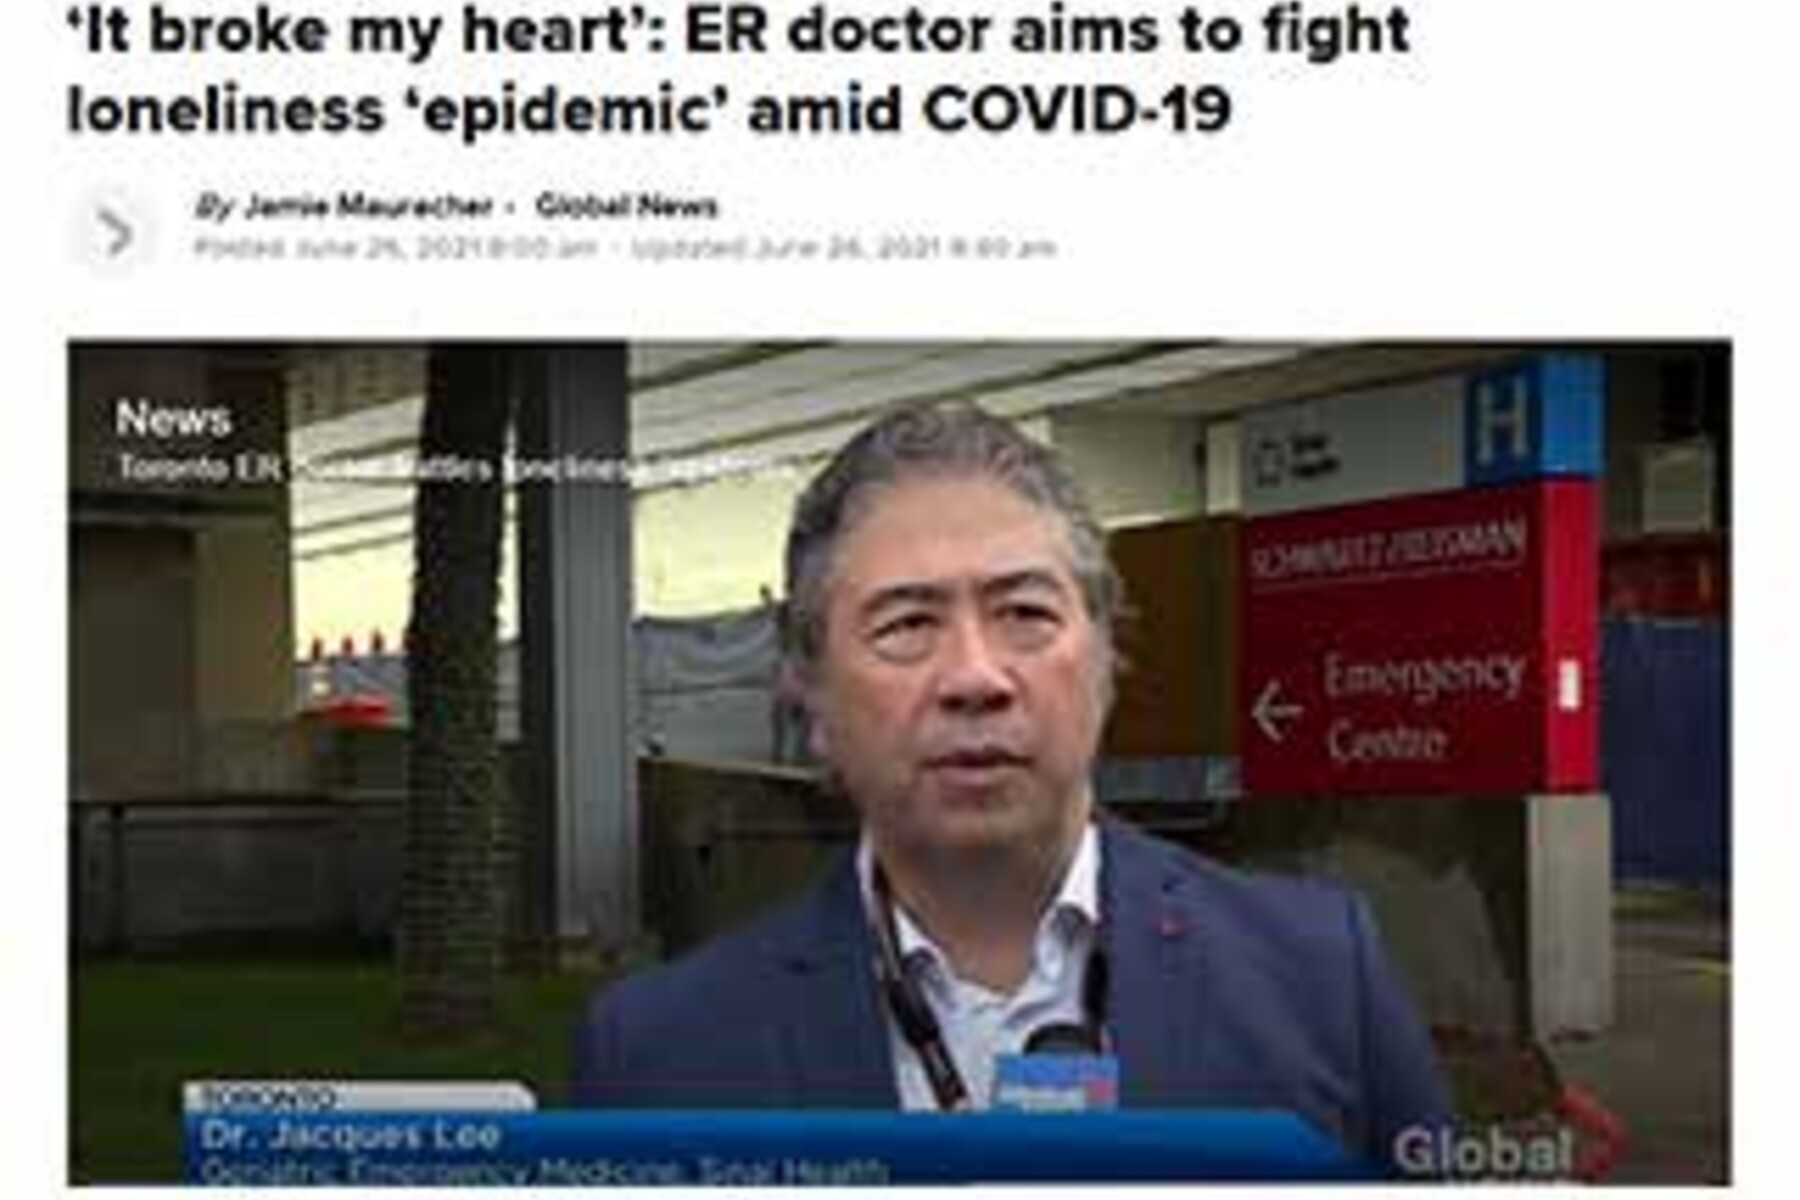 Jacques Lee screenshot from Global News - 'It broke my heart':  ER doctor aims to fight loneliness 'epidemic' amid COVID-19